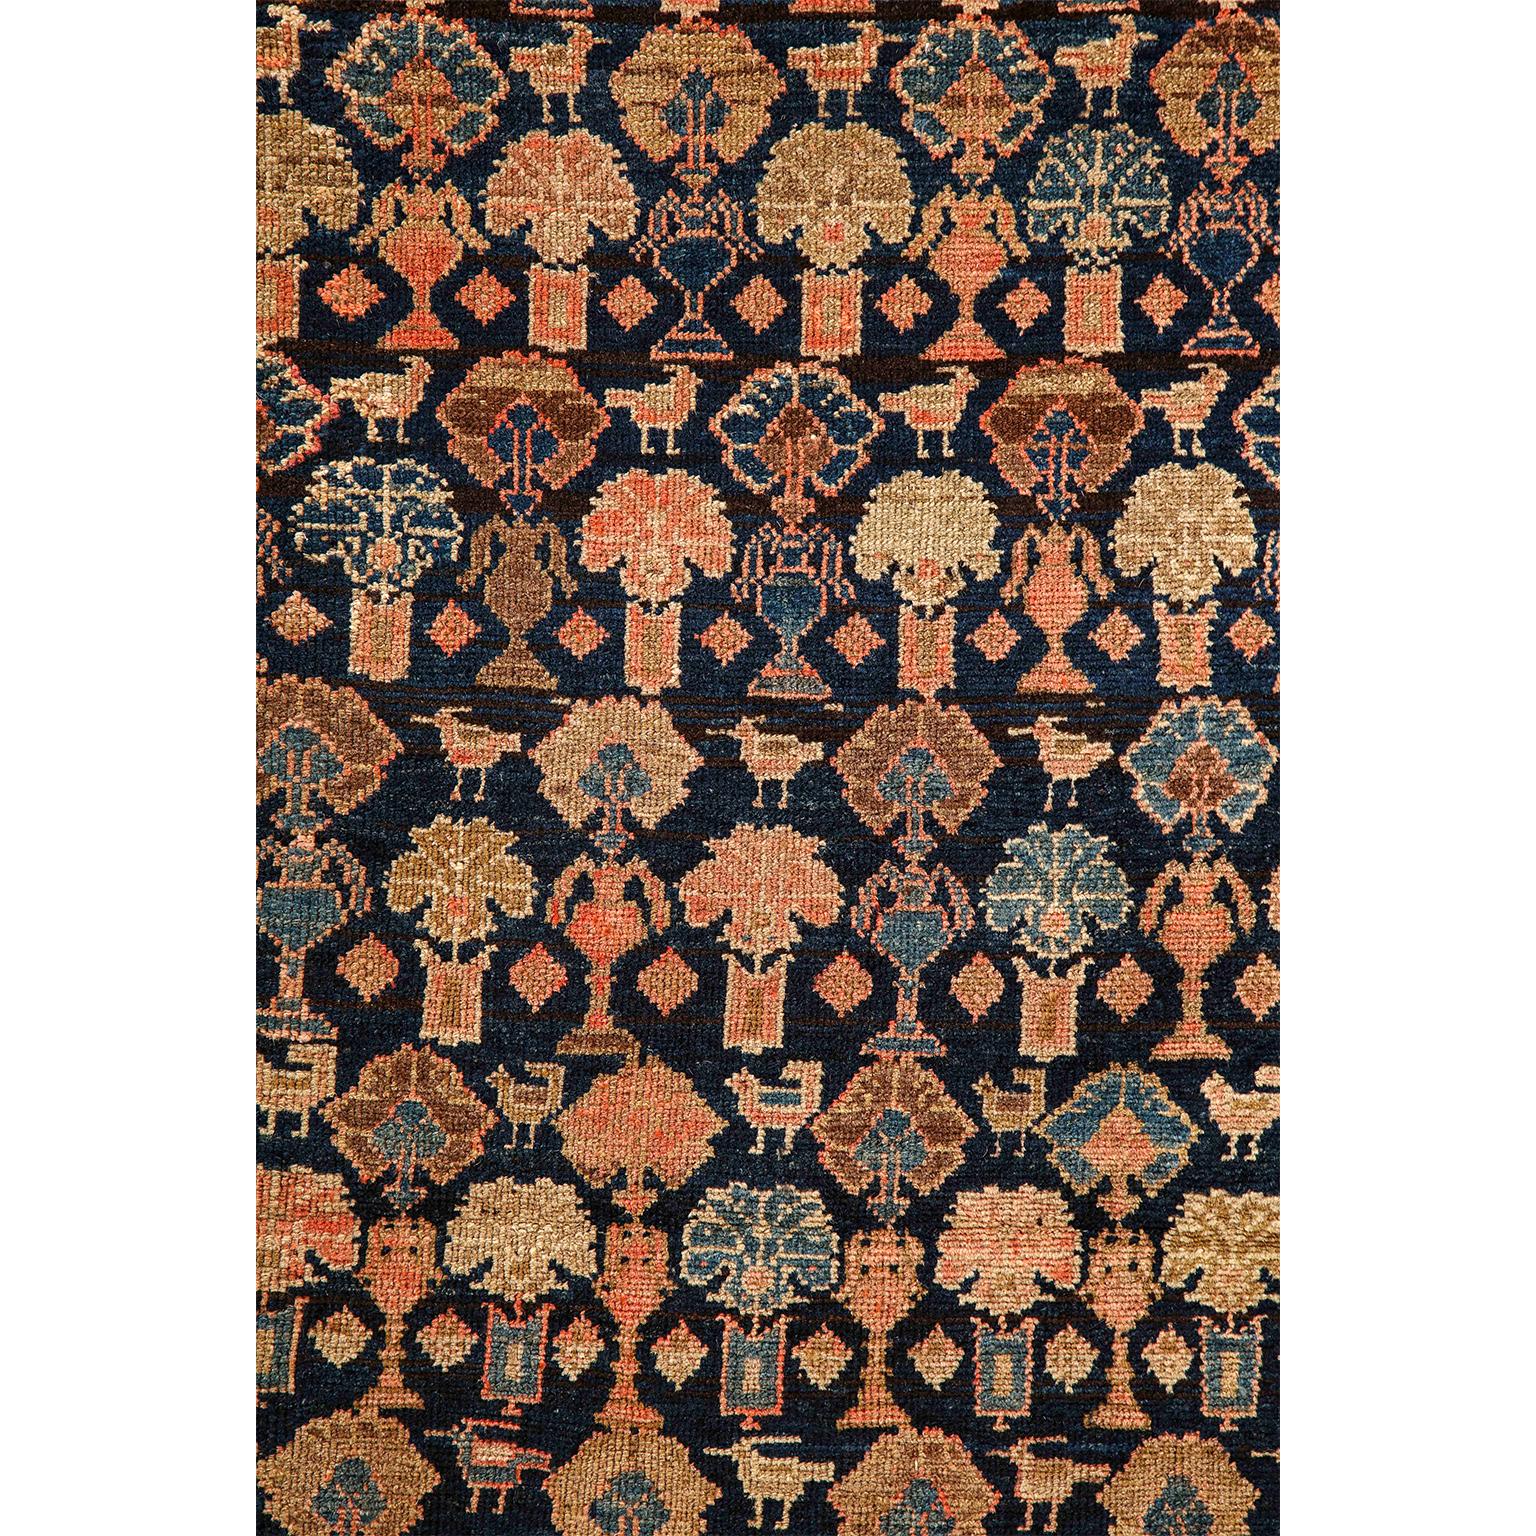 Antique 1900s Persian Malayer Rug, Flower Motifs, 5' x 7' In Good Condition For Sale In New York, NY